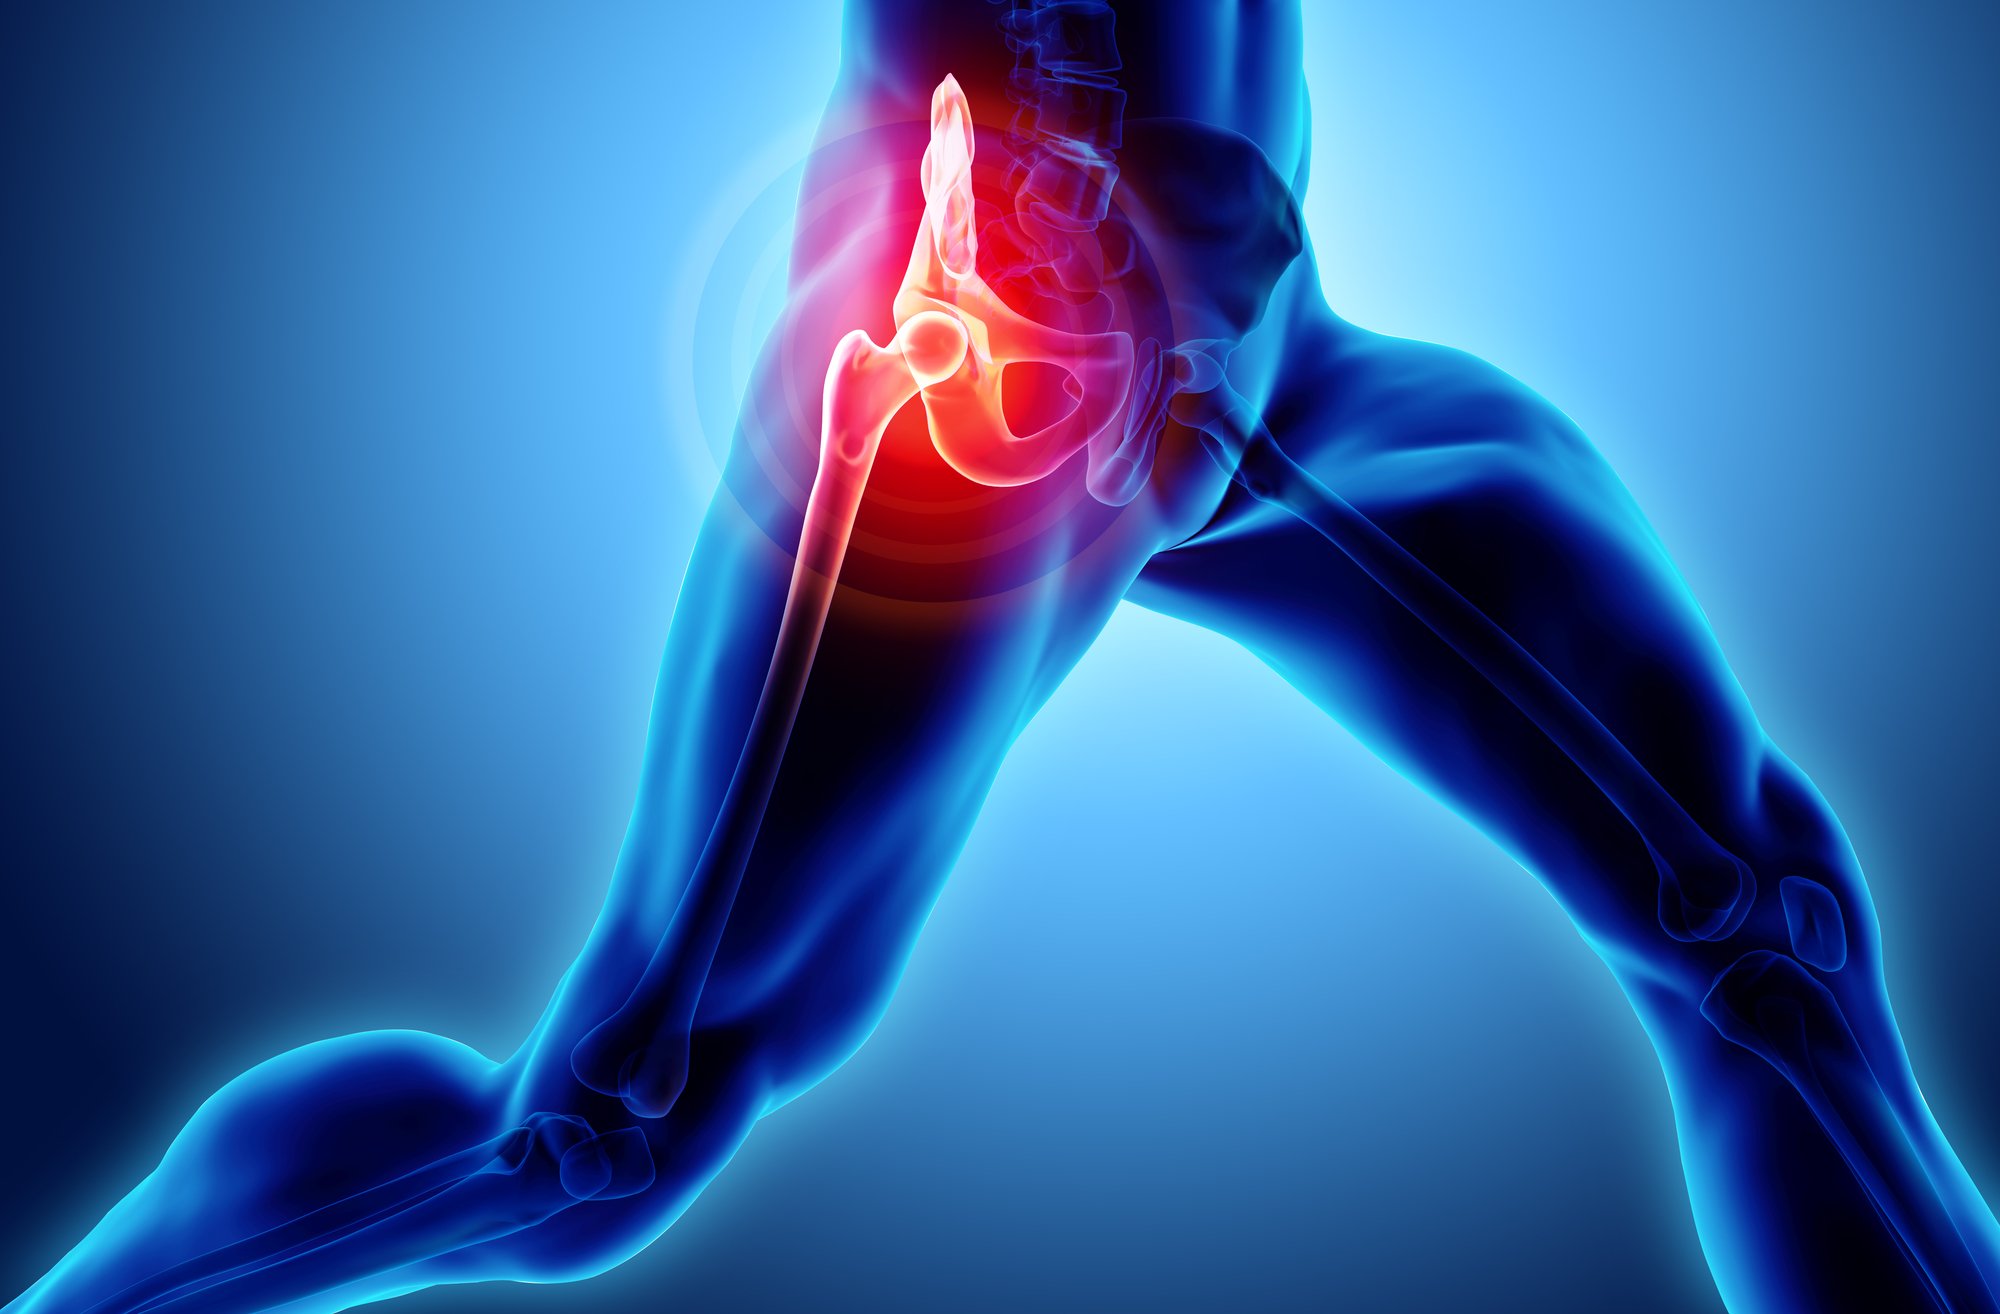 Does Your Hip Hurt? The Cause of Your Hip Pain May Not Be ...